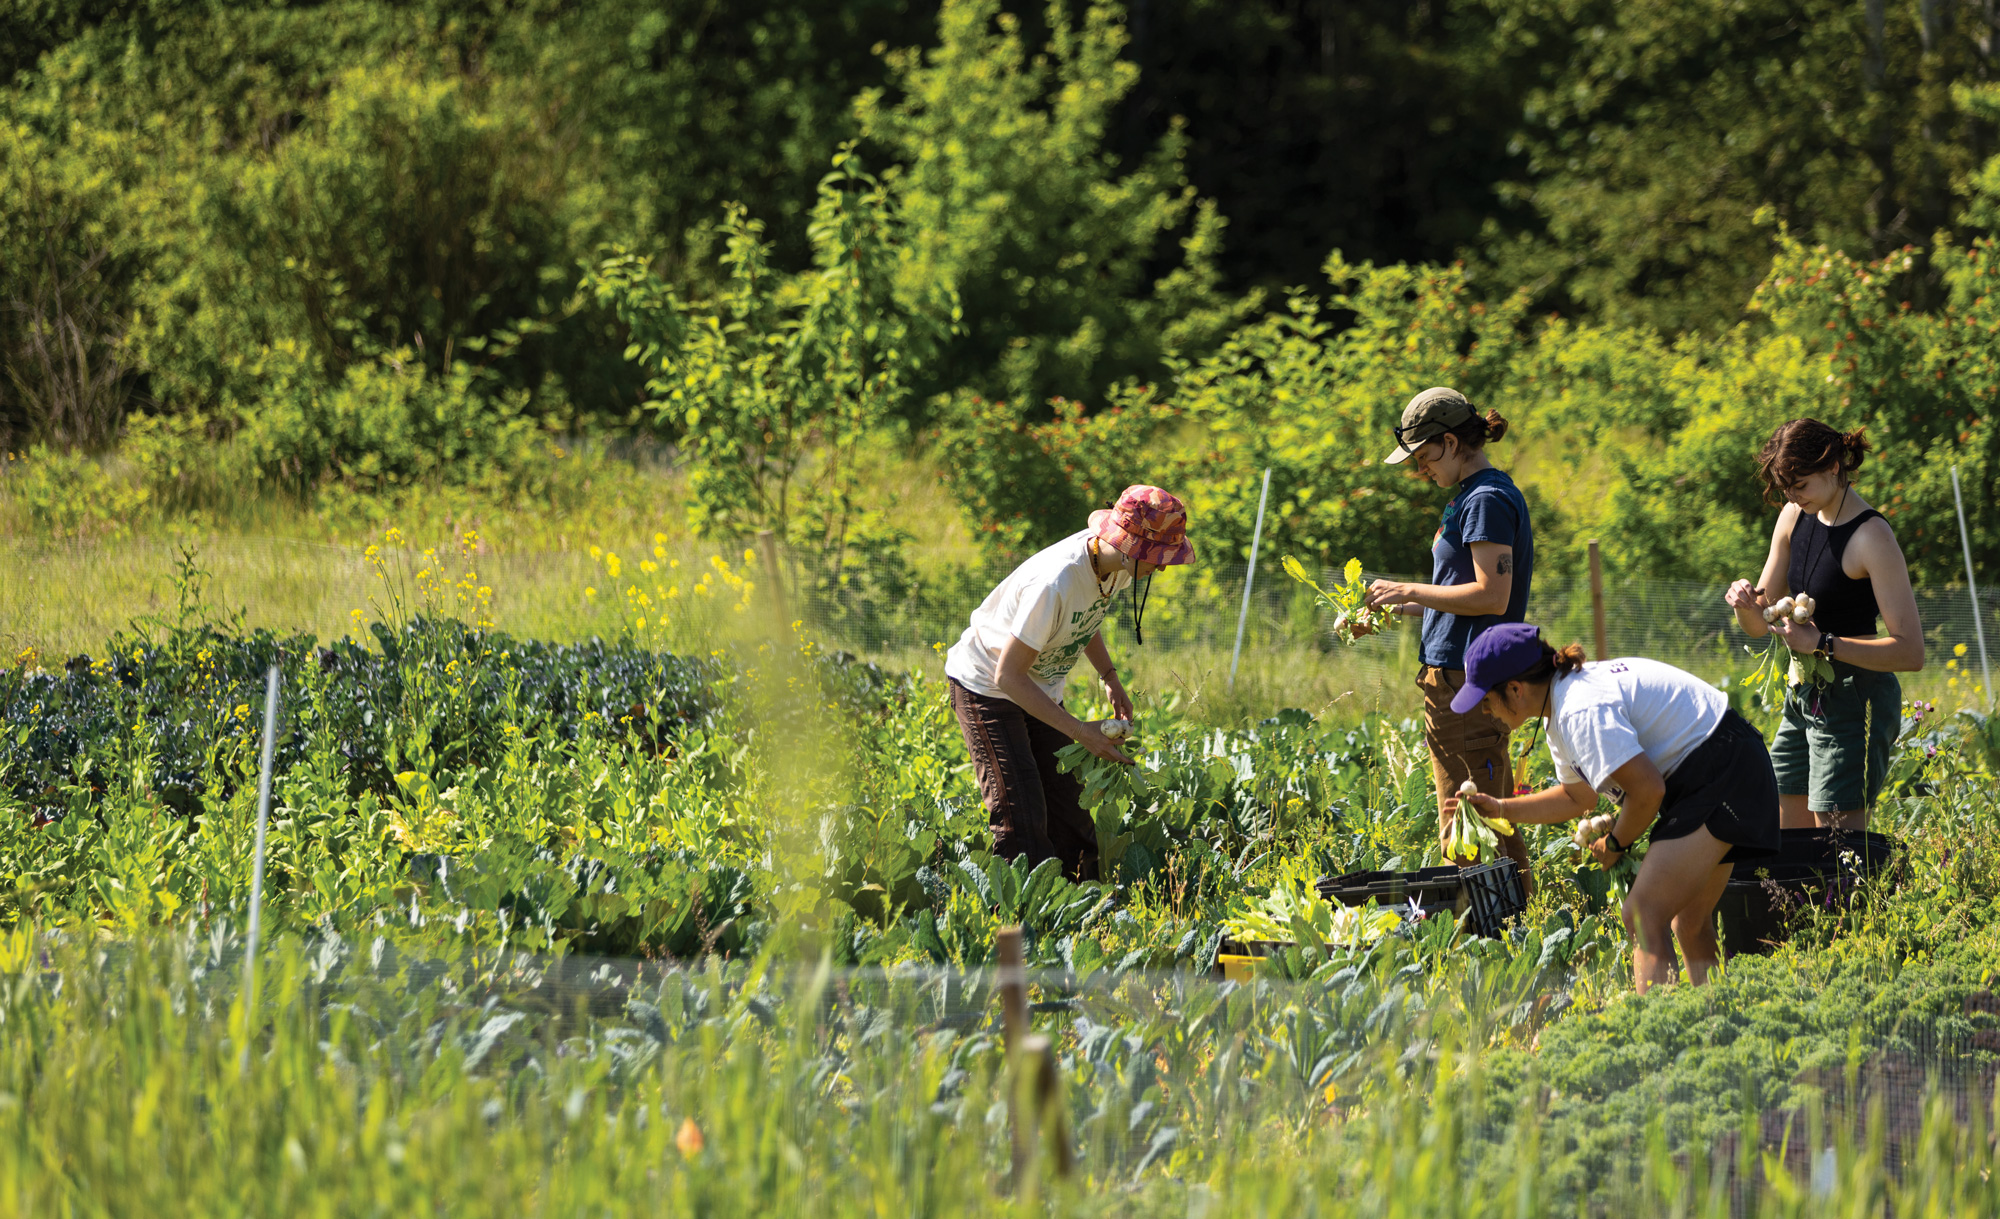 A group of four students harvest vegetables in a verdant green field